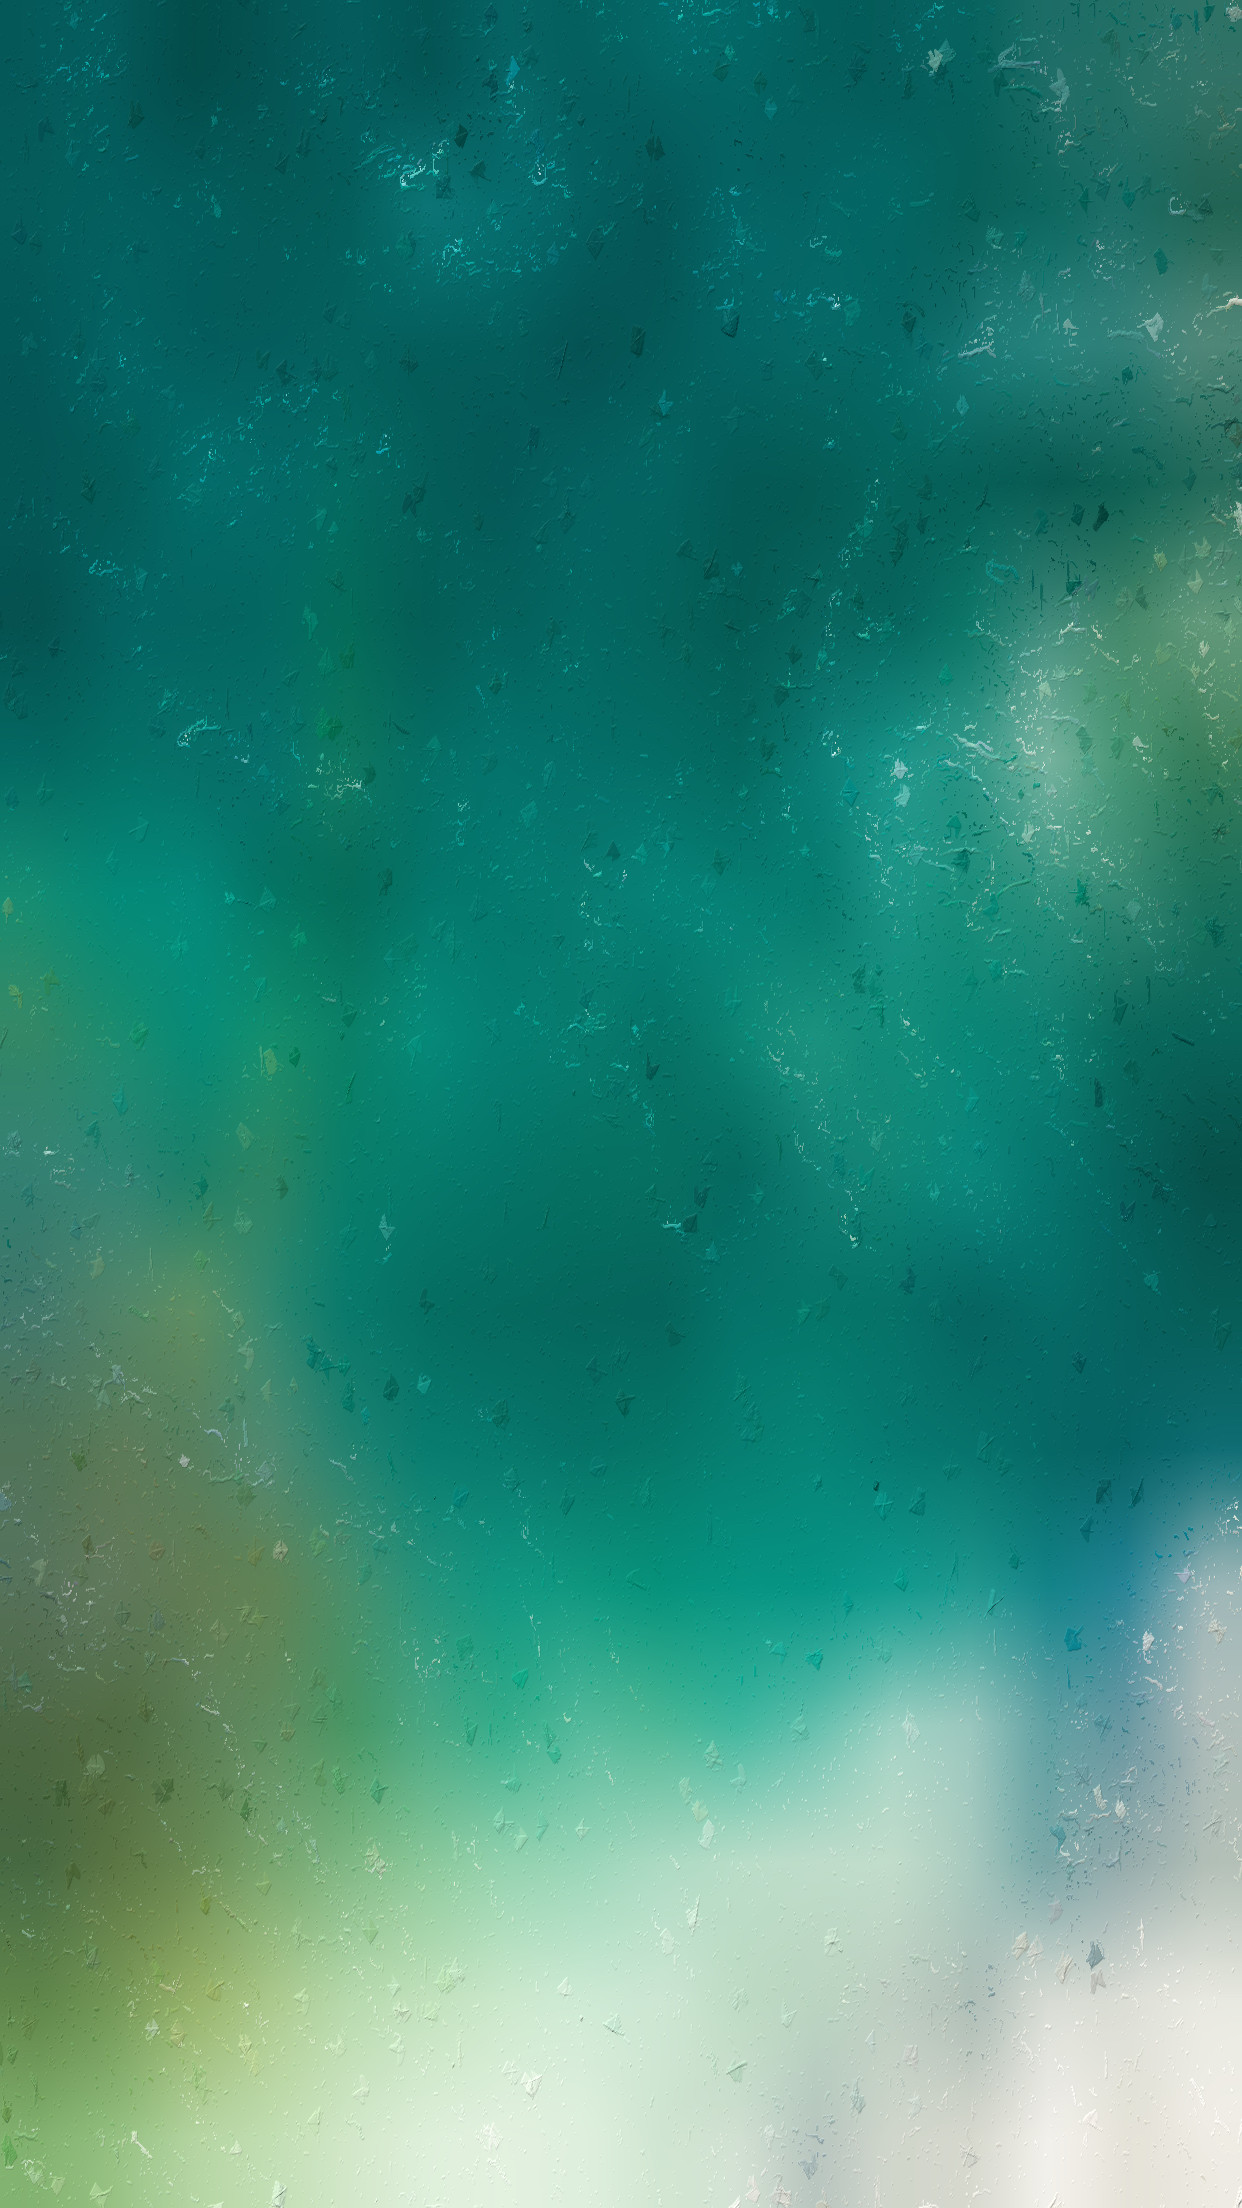 iOS 10 inspired wallpapers